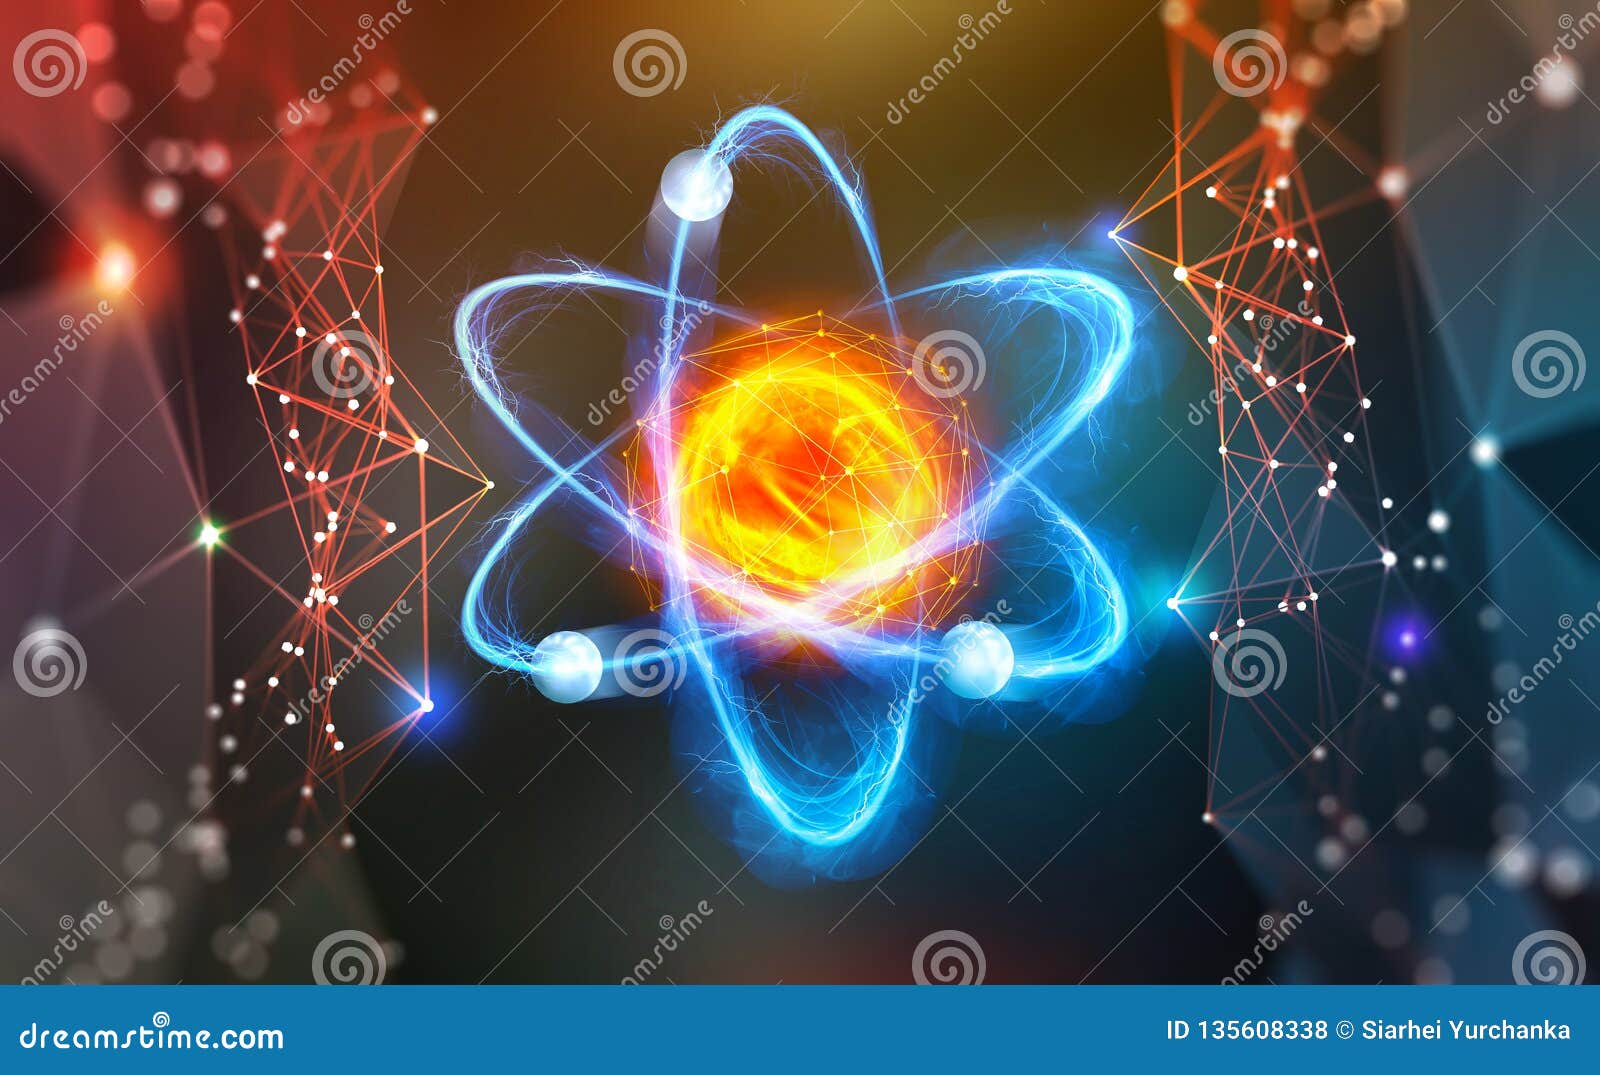 atomic structure. scientific breakthrough. modern scientific research on nuclear fusion. innovations in physics